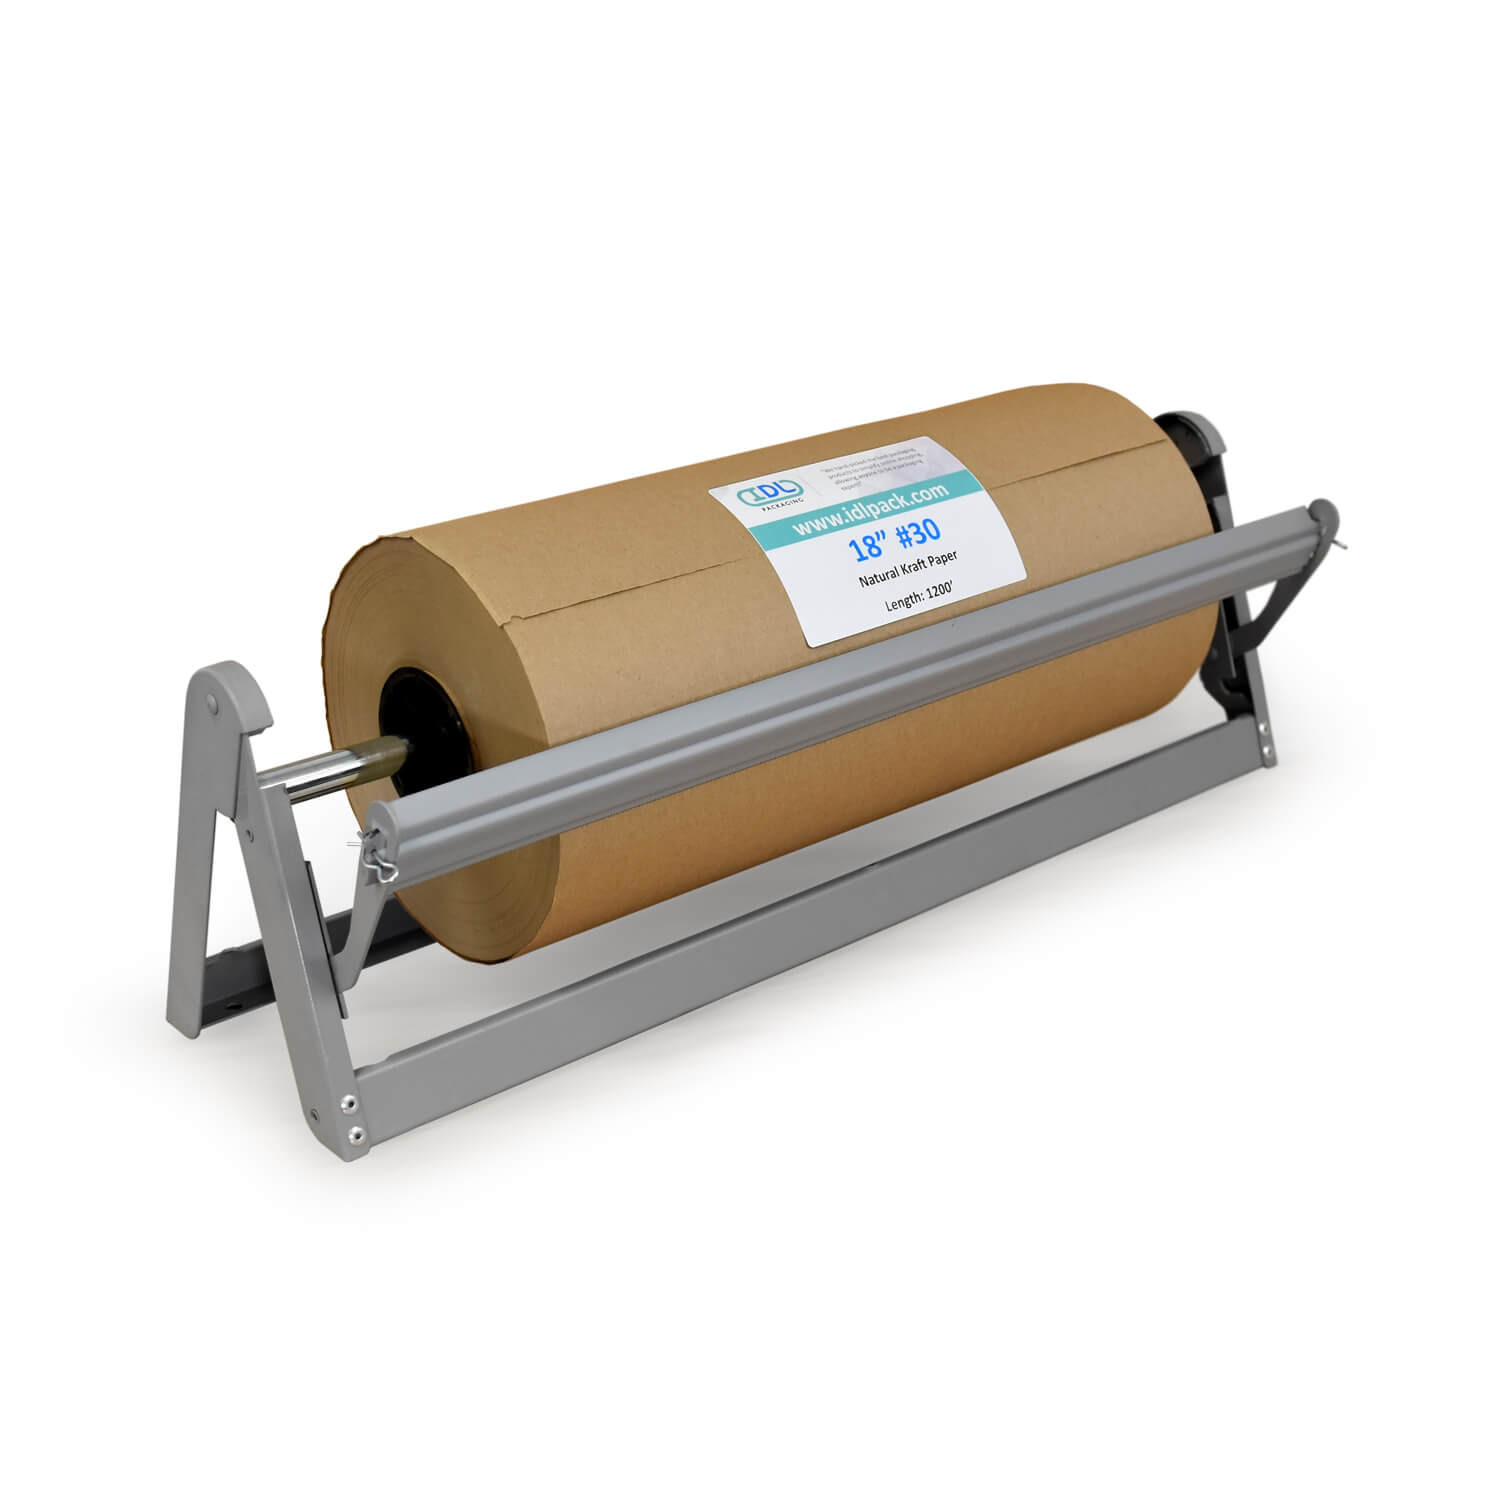 https://idlpack.com/image/cache/catalog/Products/Kraft-Paper/PD-100/PD-100-Horizontal-Paper-Dispenser-with-Cutter-1500x1500.jpg